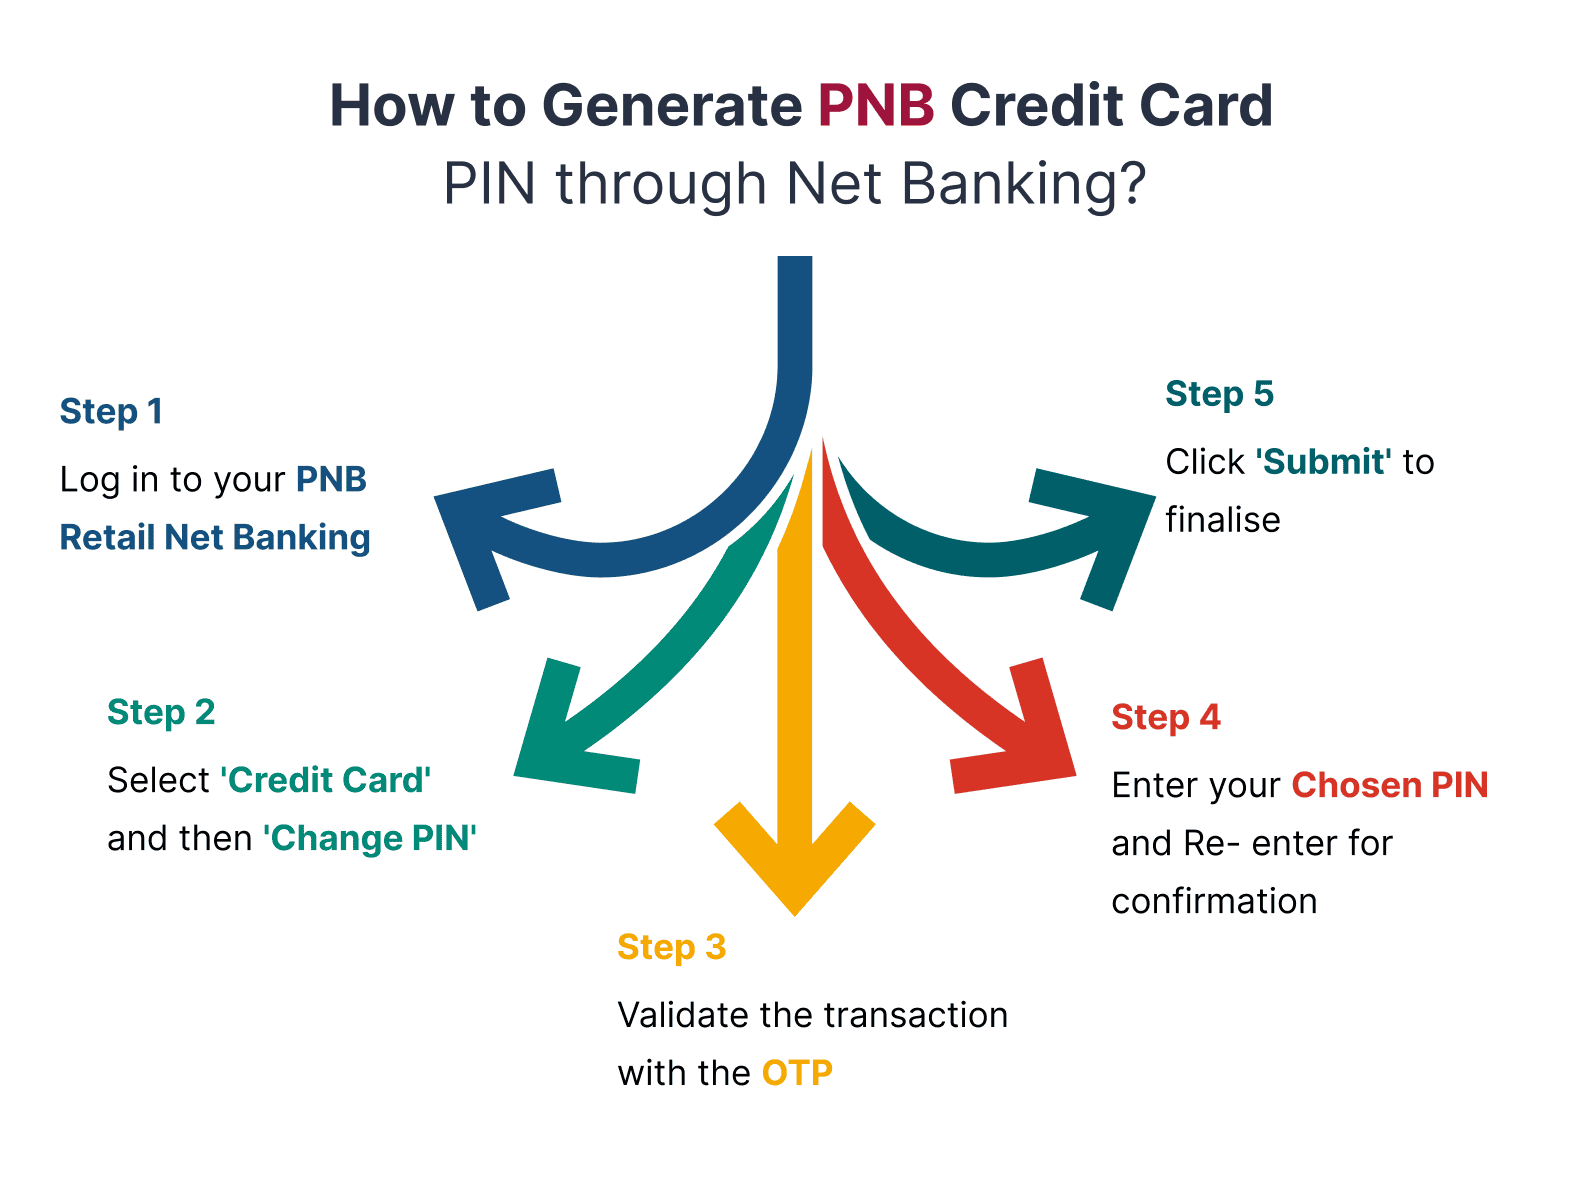 How to Generate PNB Credit Card PIN through Net Banking